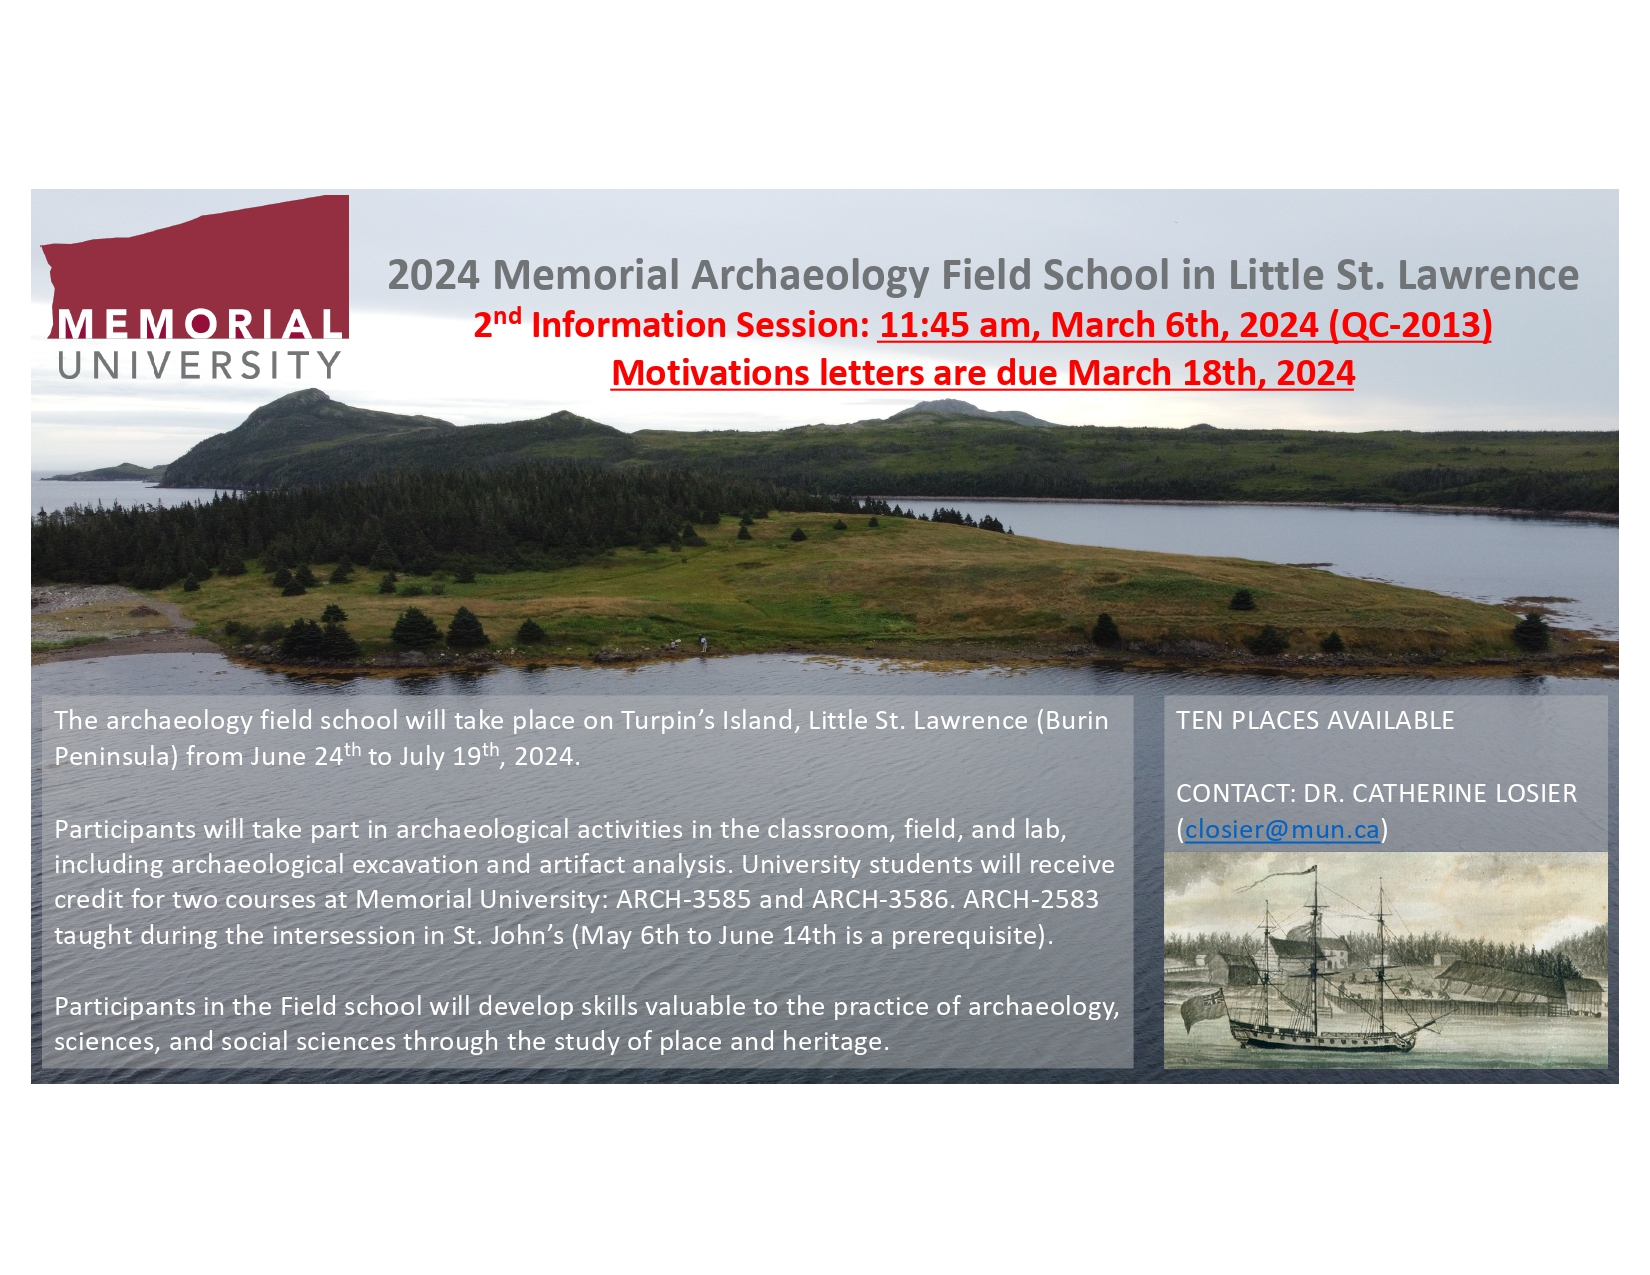 Poster for the second information session for the 2024 Archaeology Field School on March 6th, 2024 at 11:45 am